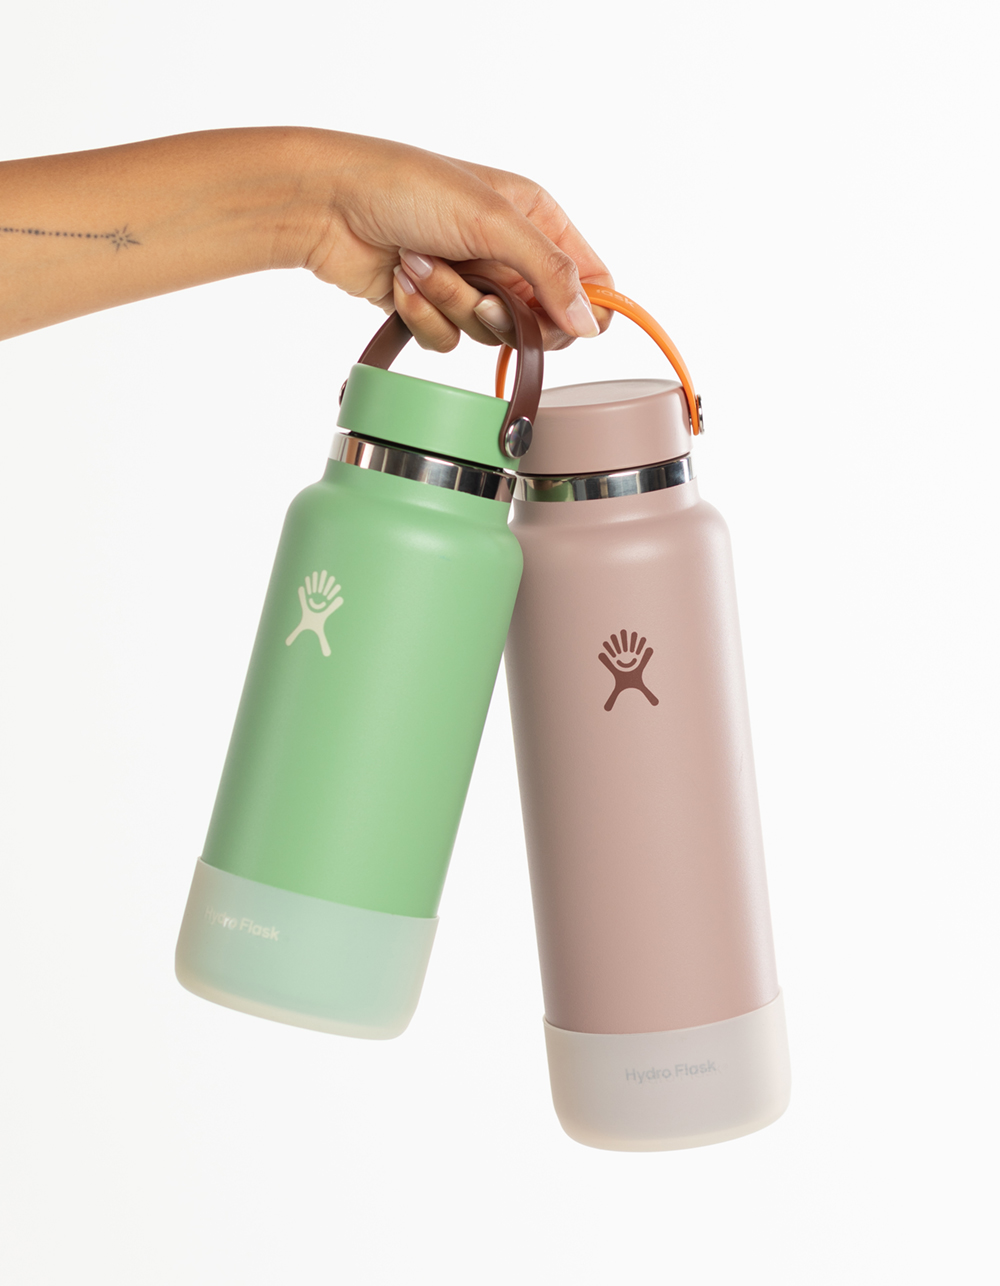 Sometimes the best things don't come in small packages. Meet the new 6, hydroflask stanley